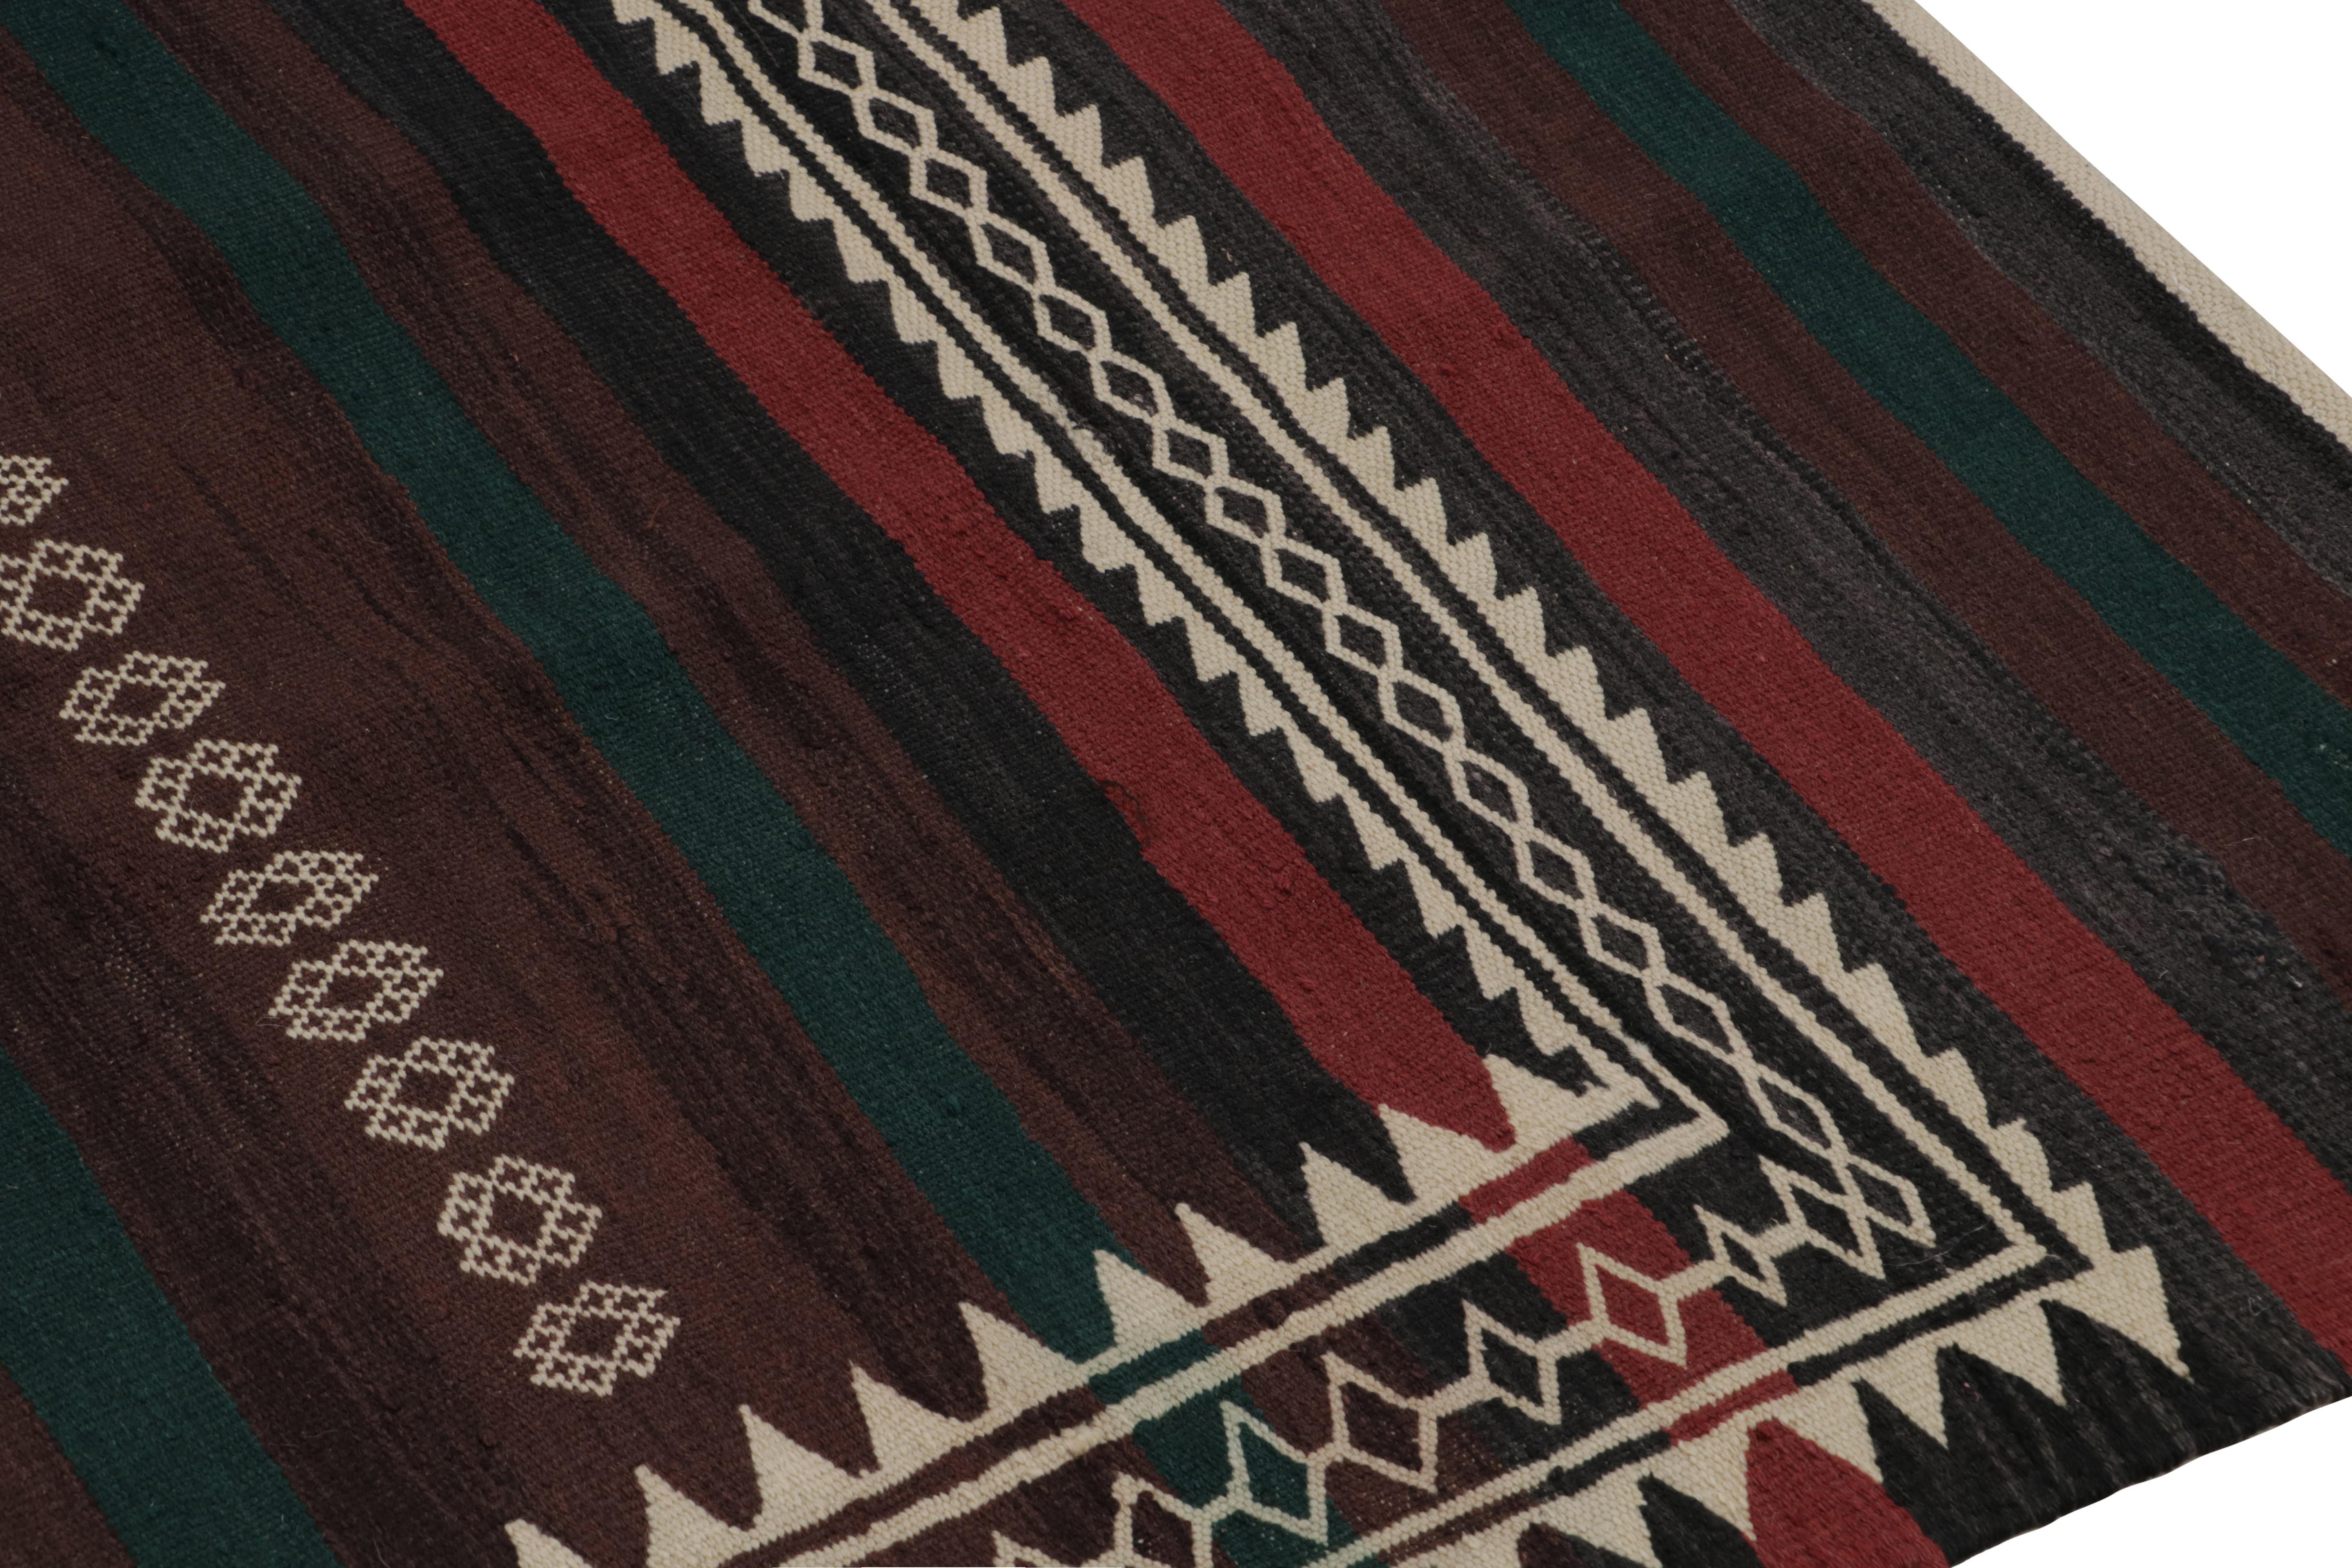 Mid-20th Century Vintage Afghan Tribal Kilim with Red-Brown Geometric Patterns, from Rug & Kilim For Sale